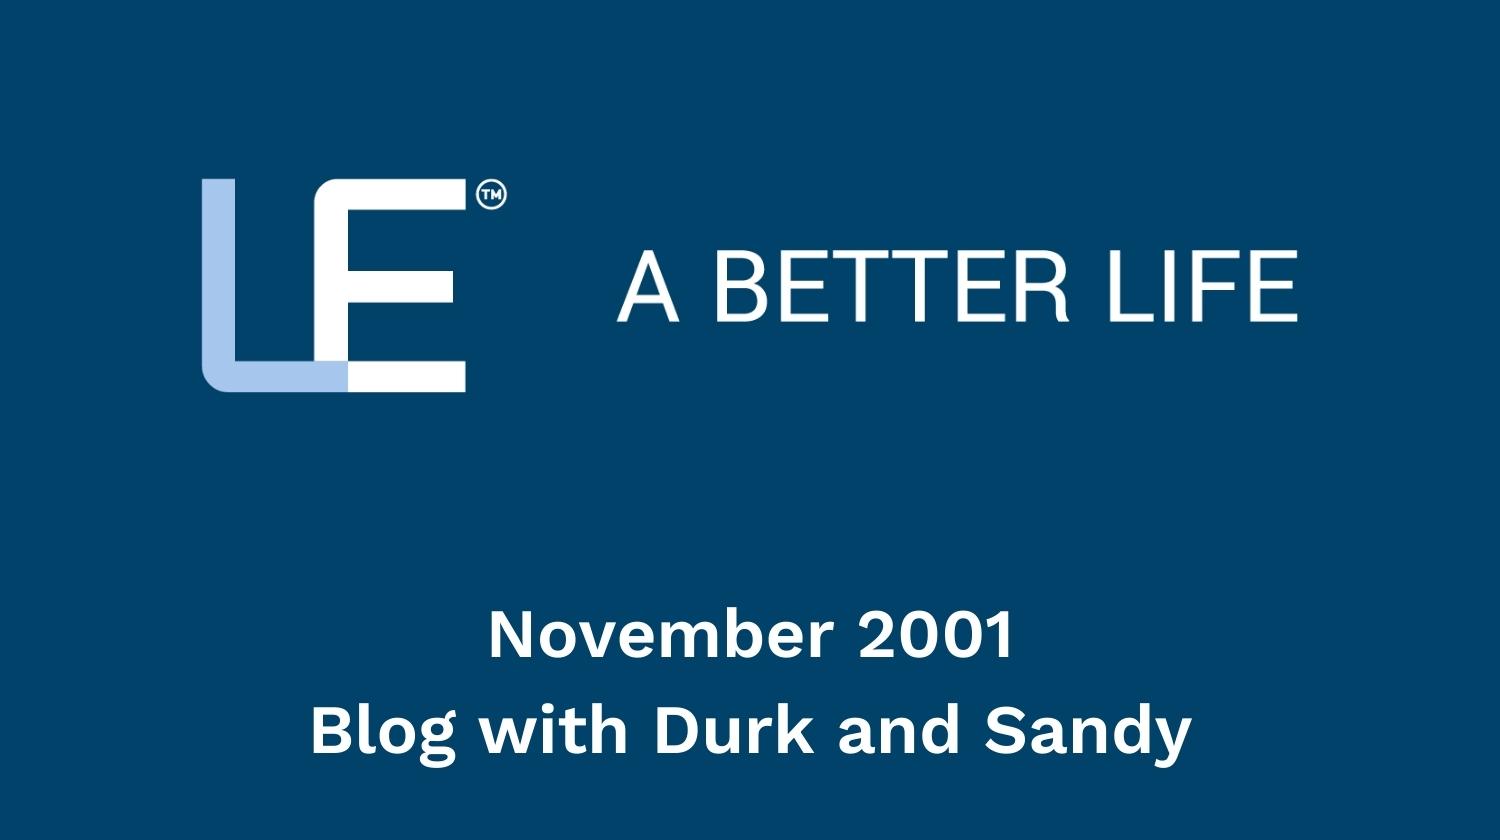 November 2001 - Special Supplement Blog with Durk and Sandy